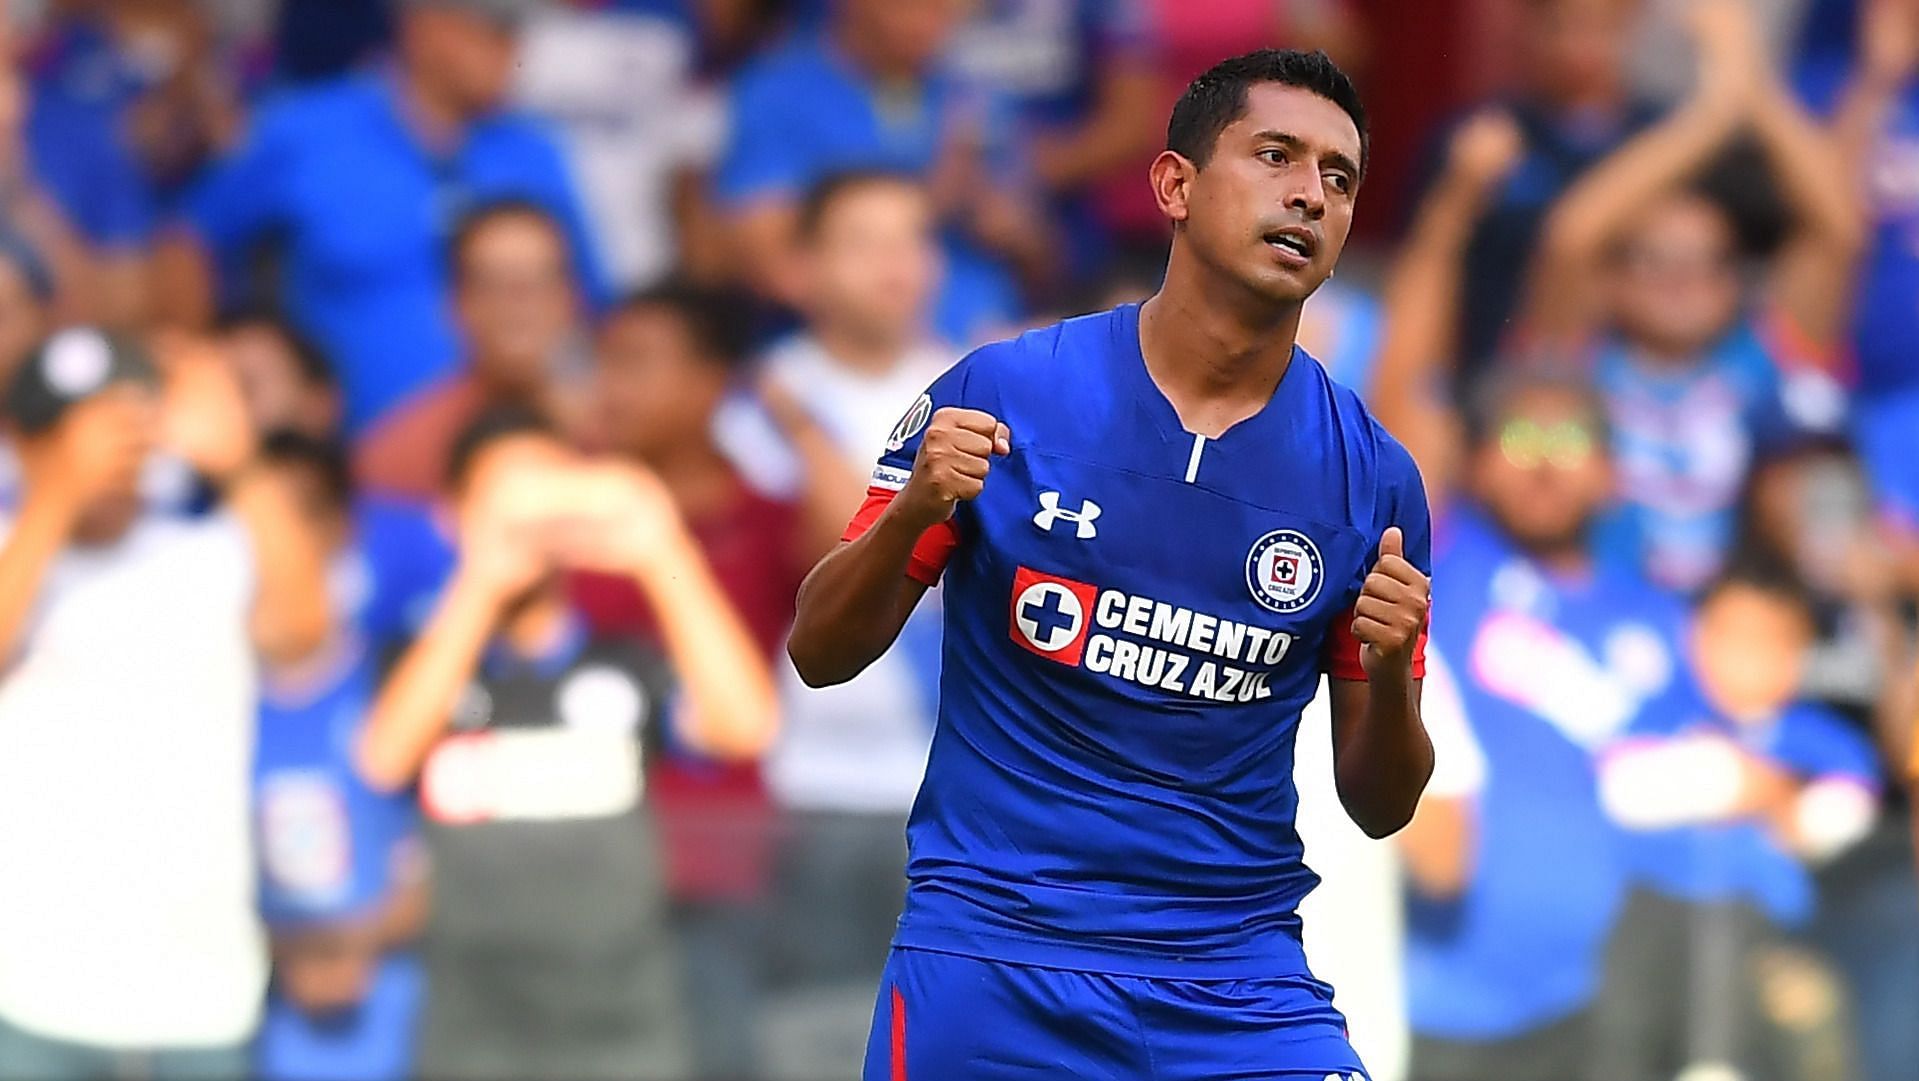 Cruz Azul can go atop Liga MX standings after their game against Necaxa on Saturday